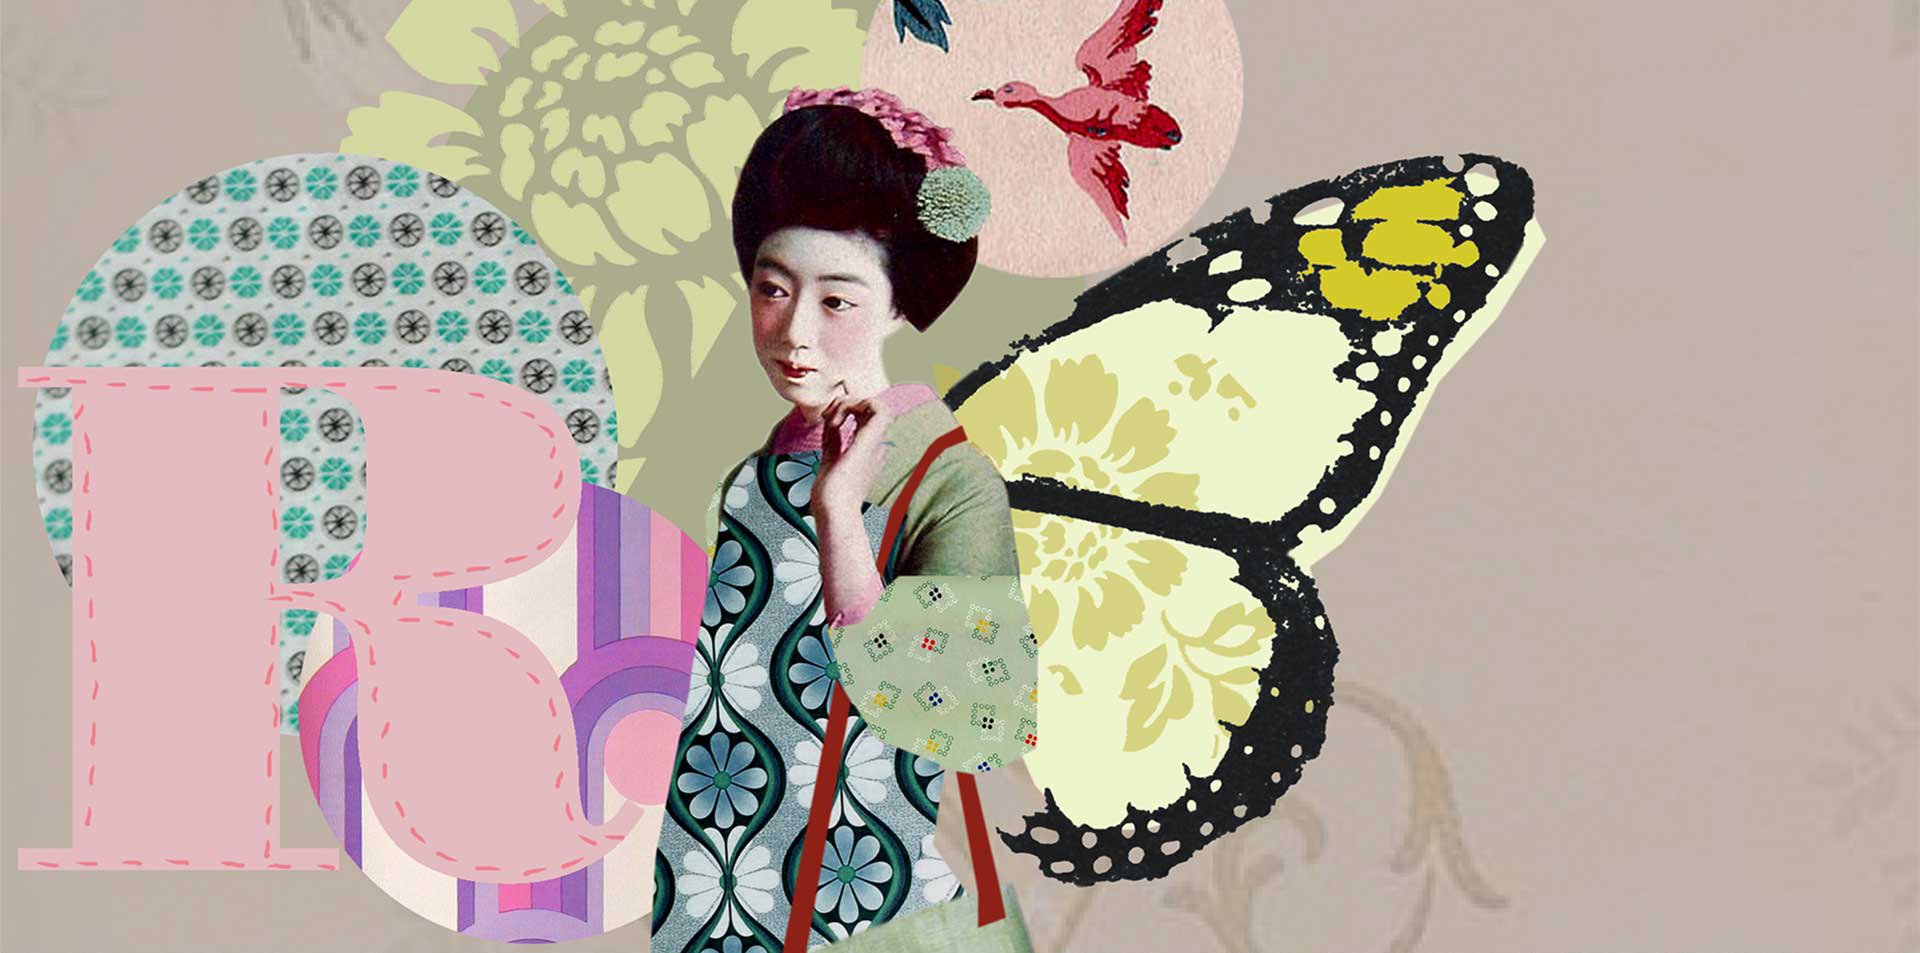 animated character of Geisha Girl with butterfly wings